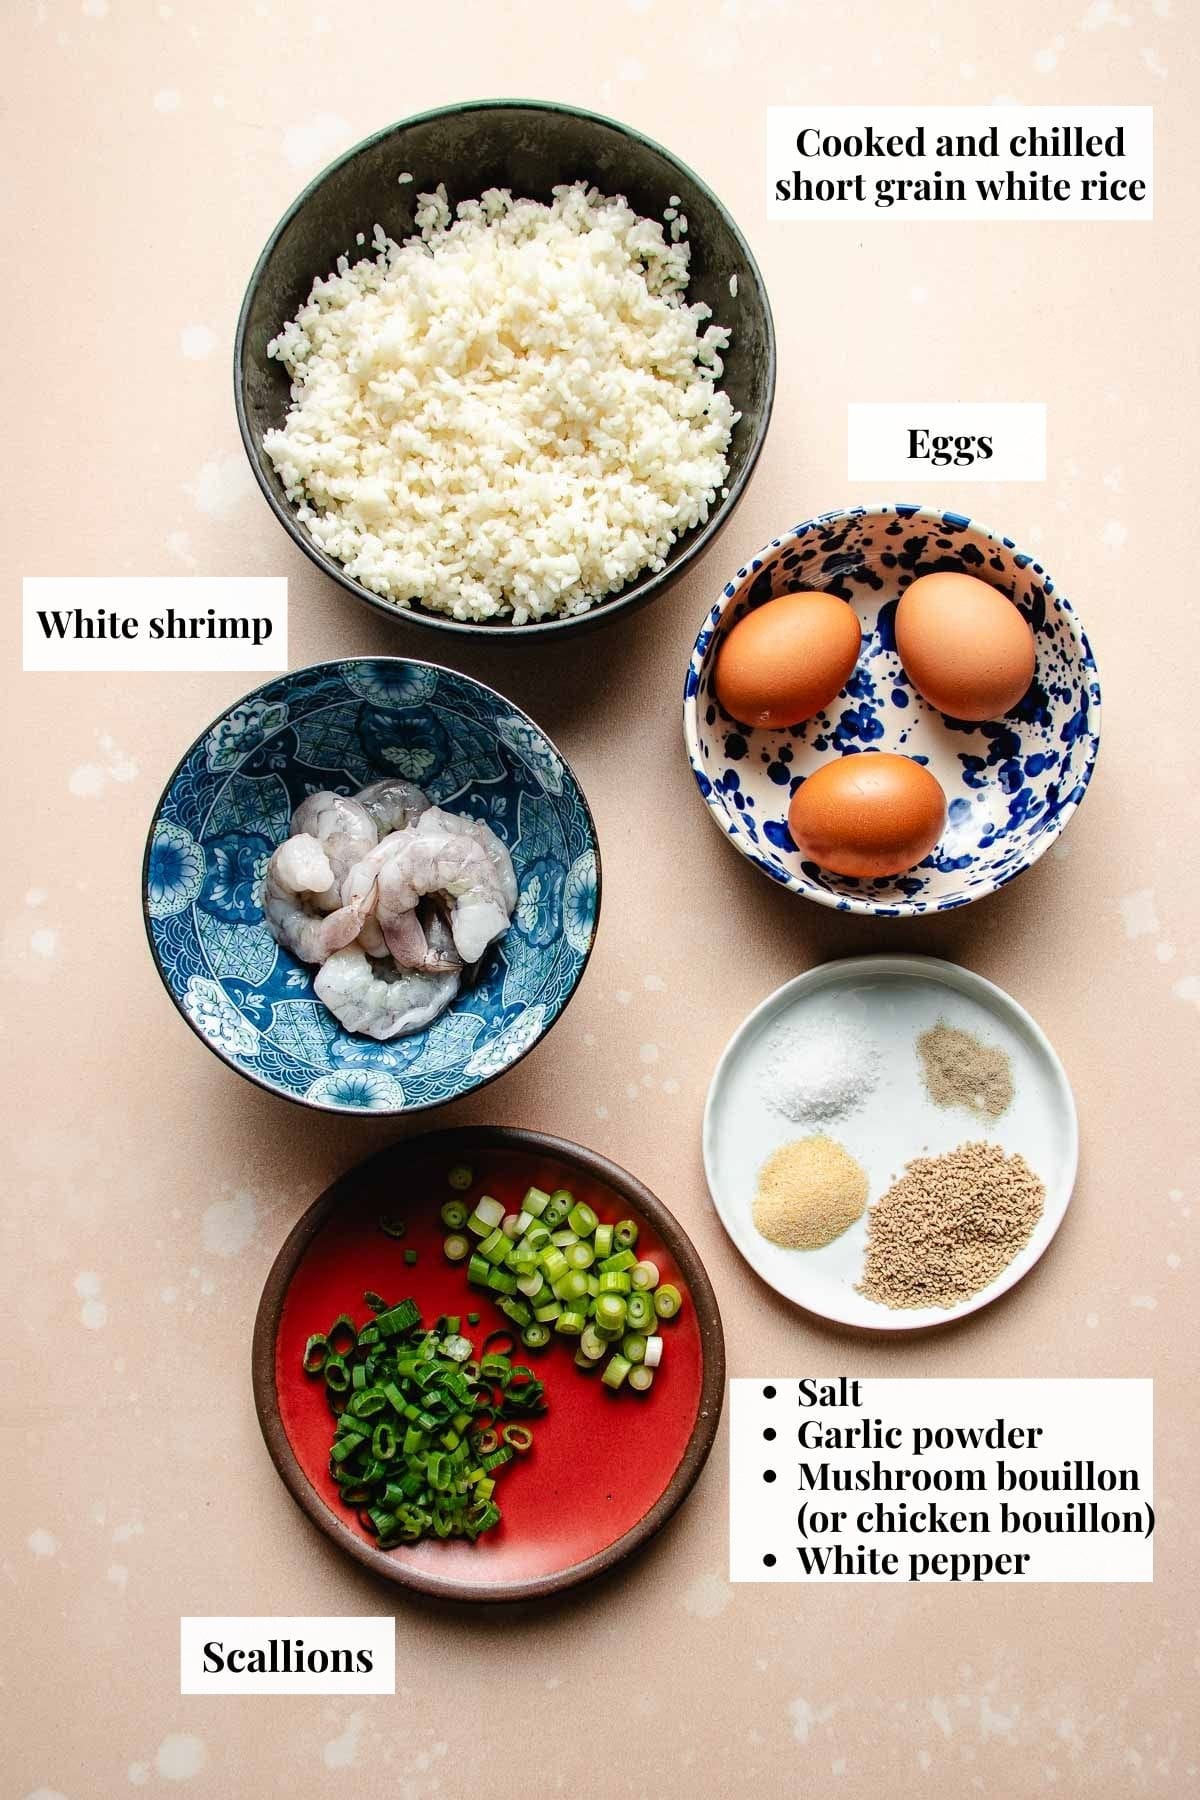 Photo shows ingredients and seasoning needed to make the Taiwanese style shrimp fried rice at home.